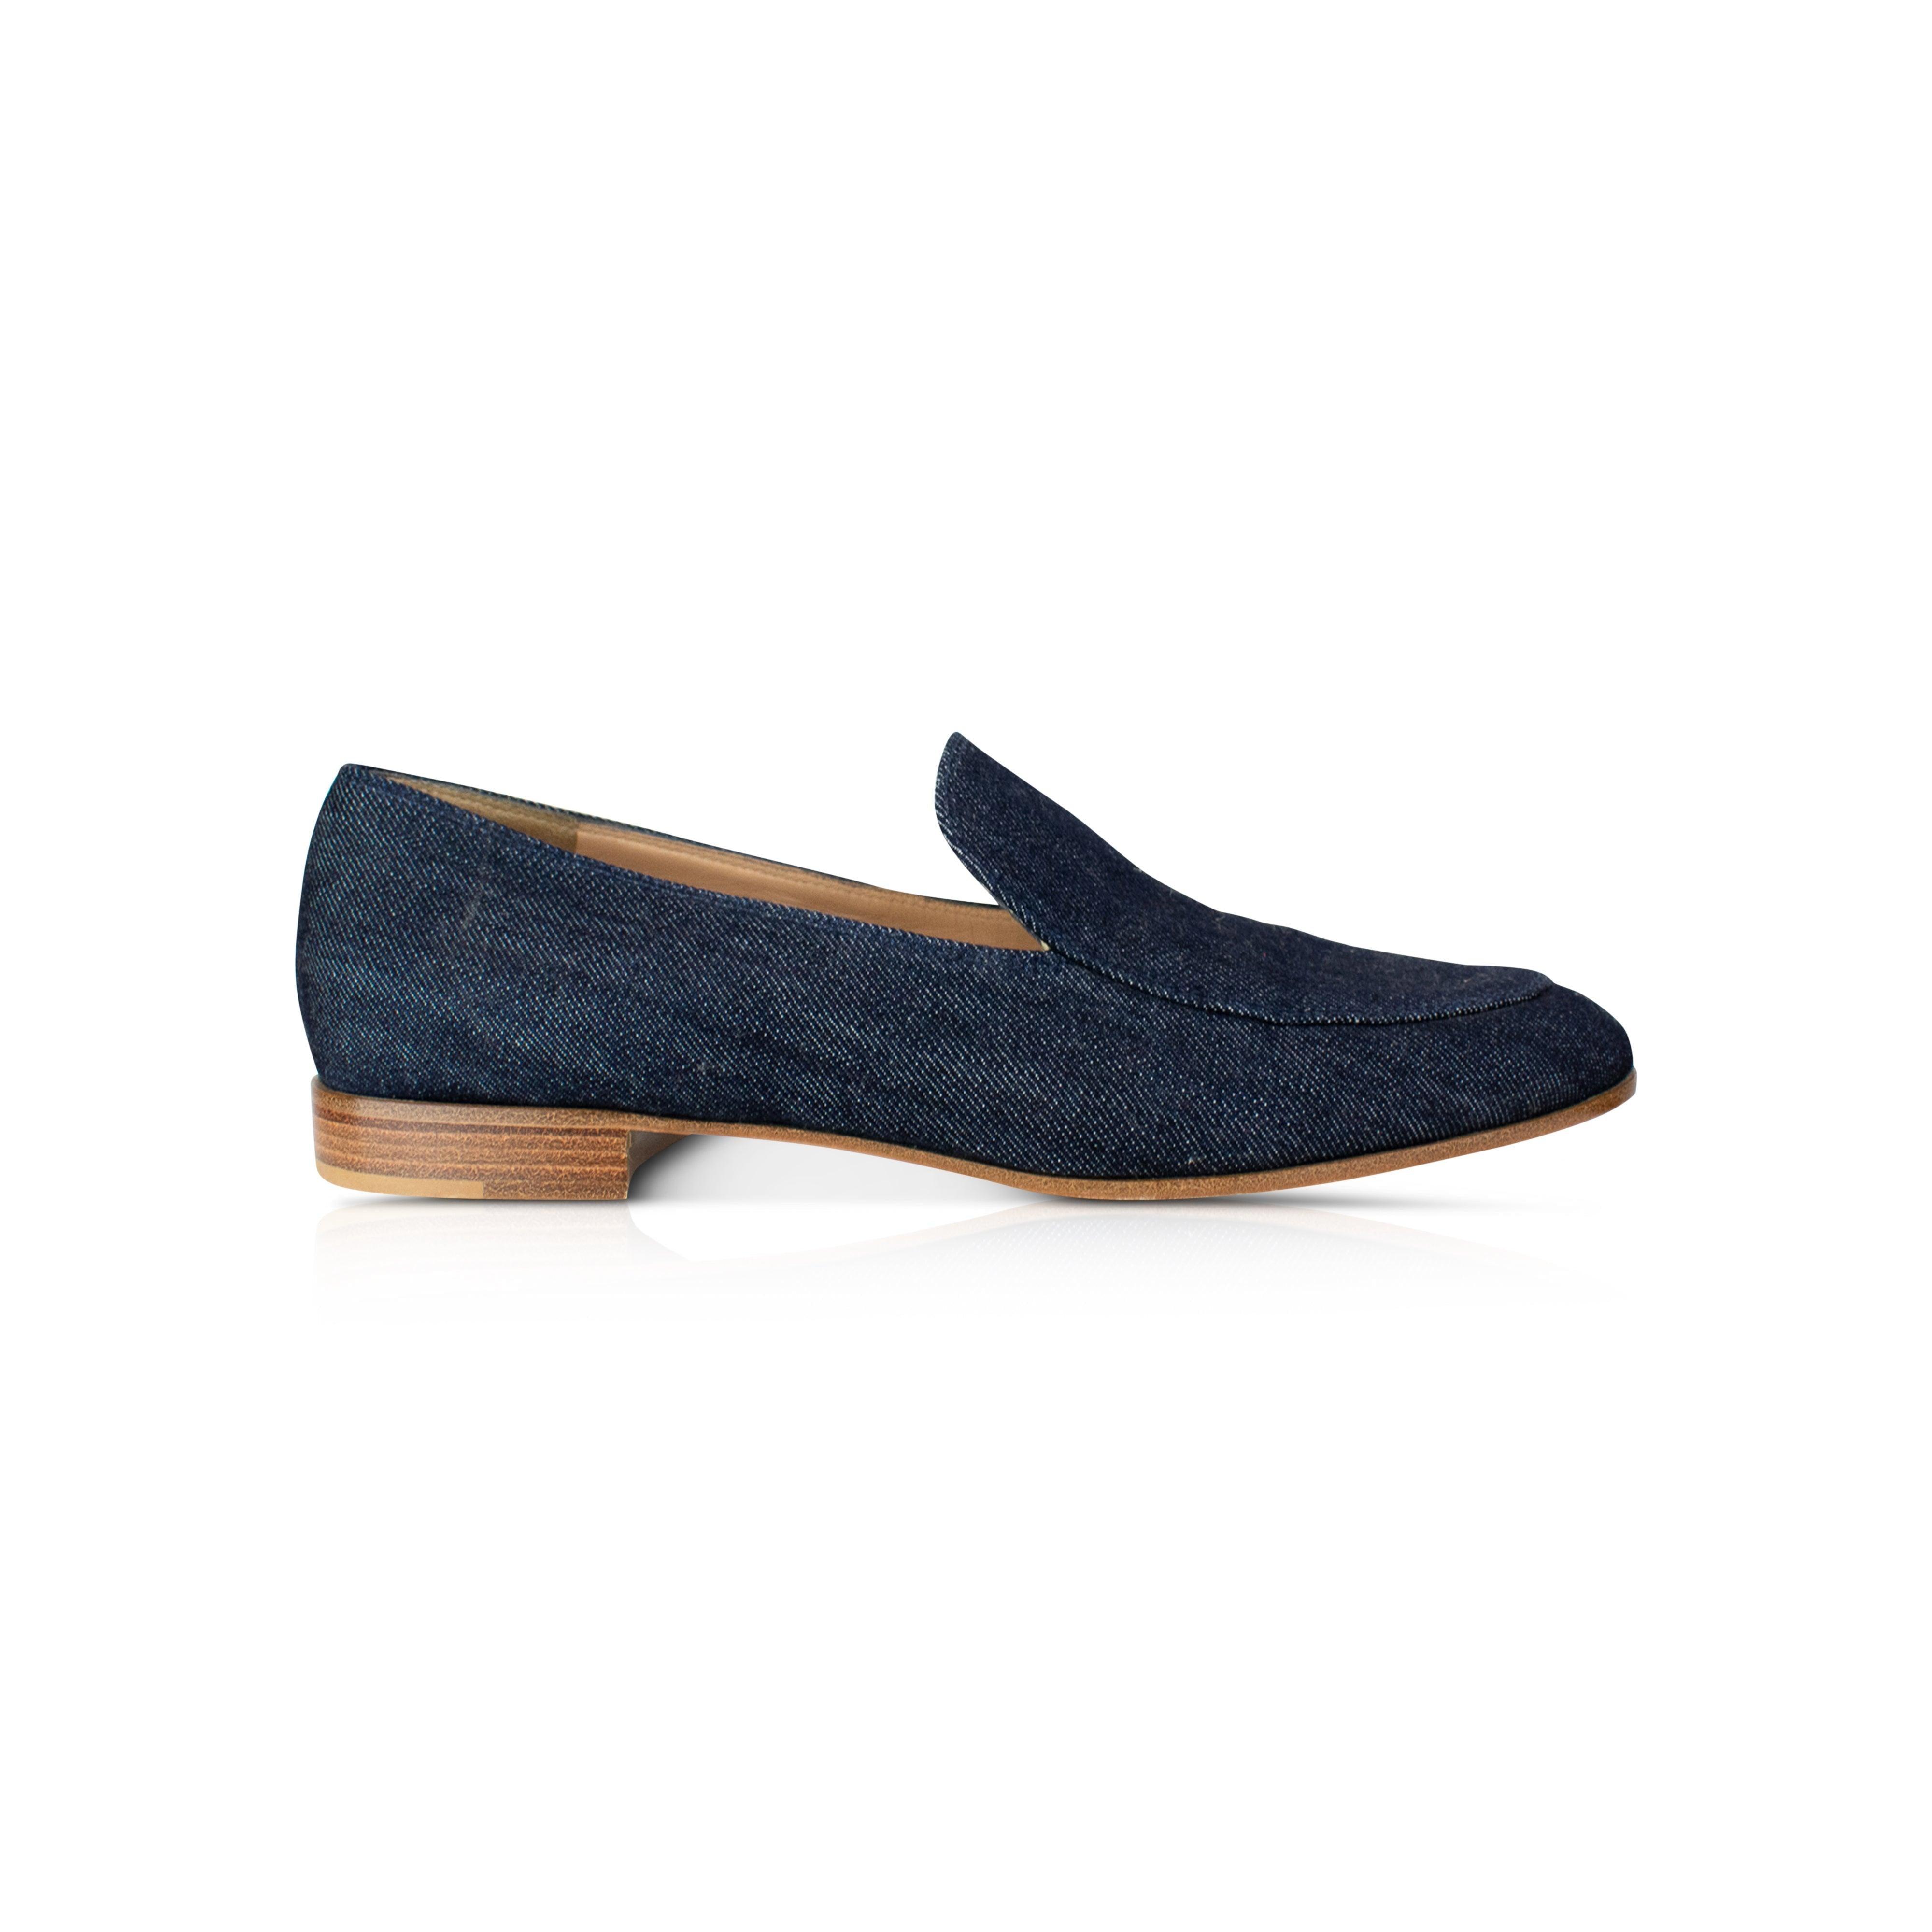 Gianvito Rossi Loafers - 37.5 - Fashionably Yours